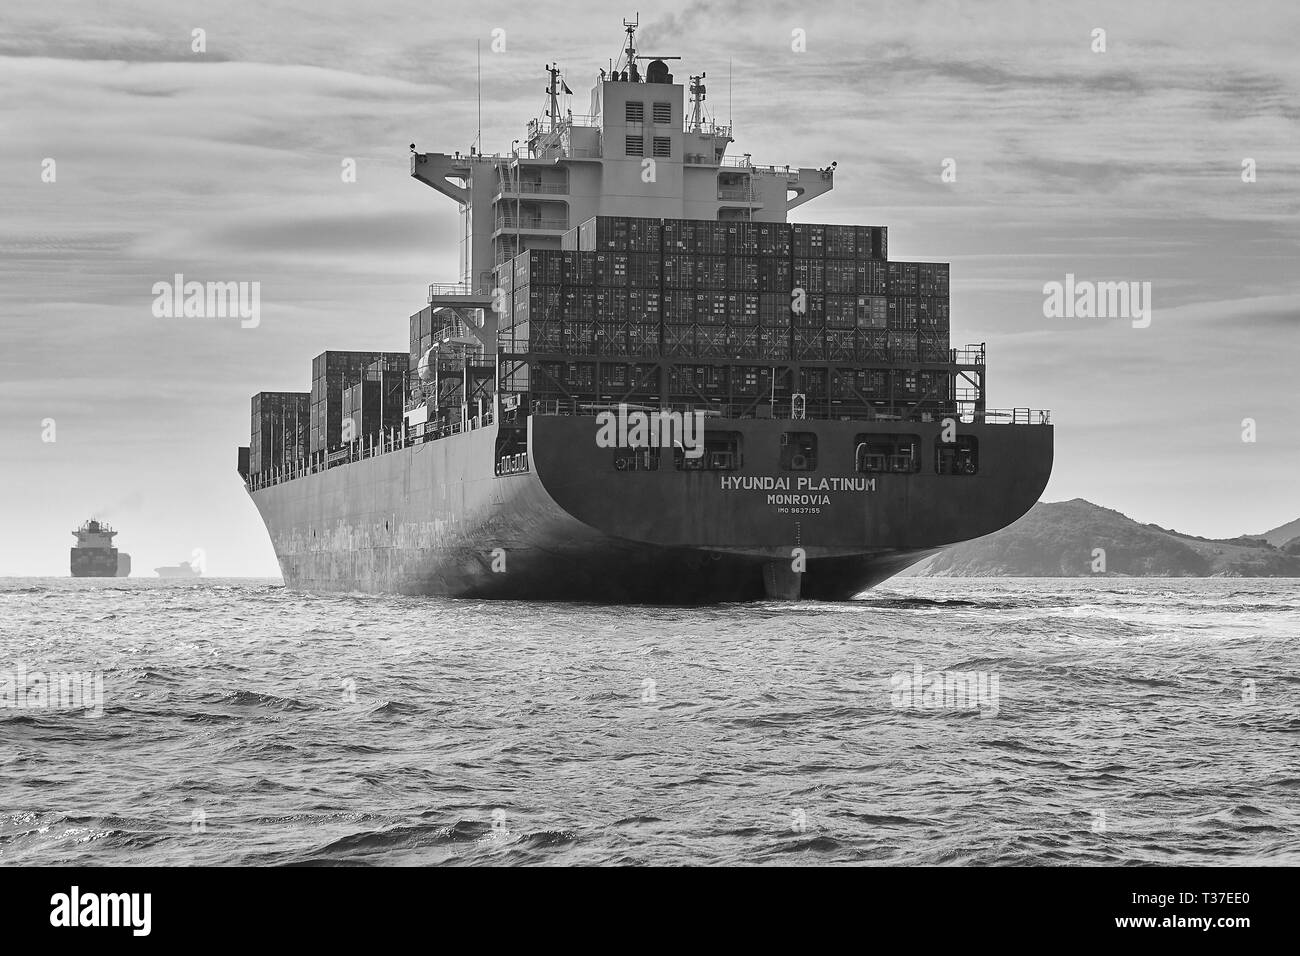 Black And White Photo Of The Giant Container Ship, Hyundai Platinum, Underway In The Busy East Lamma Channel, Hong Kong. Stock Photo